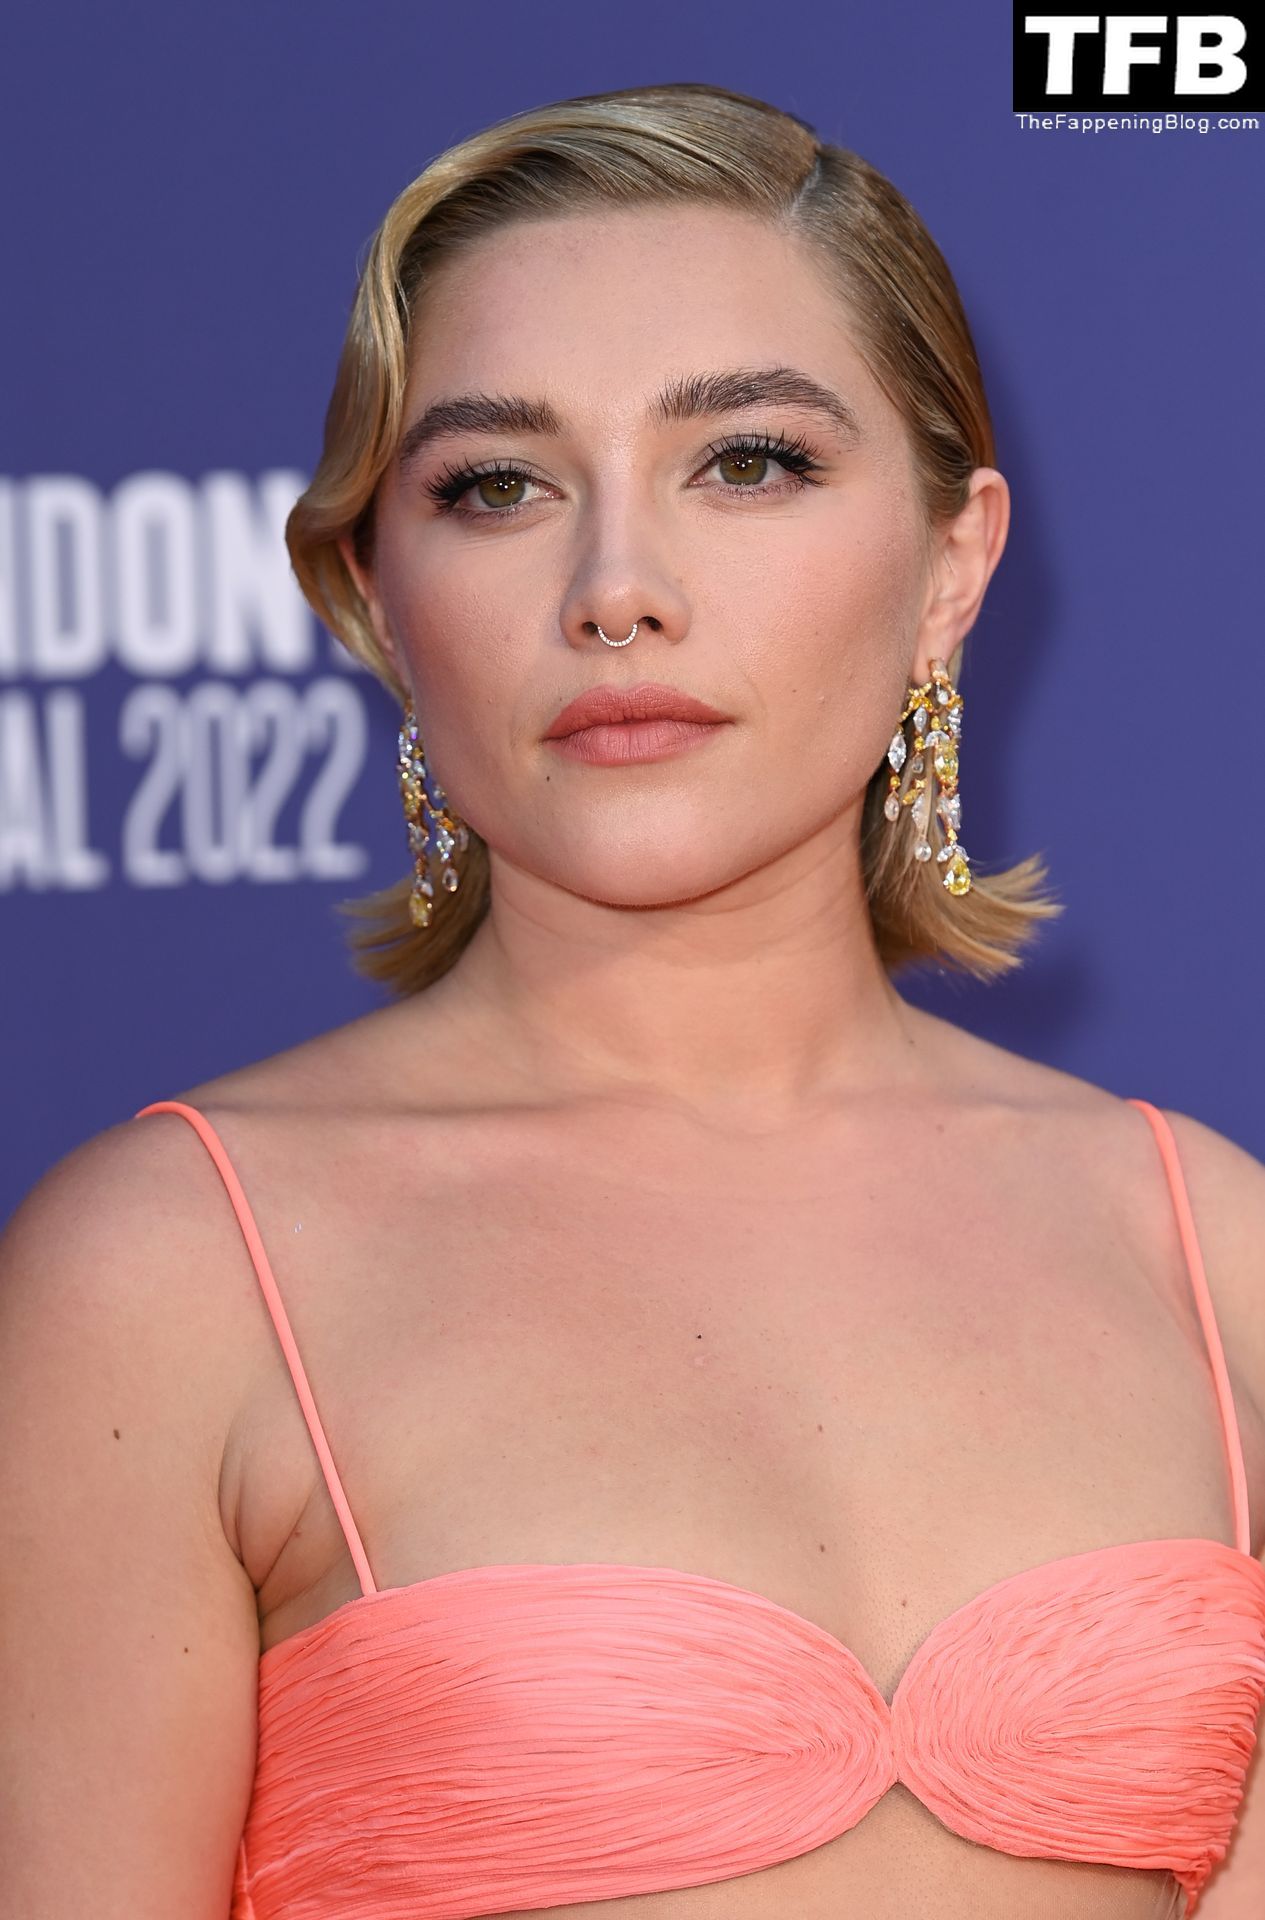 Florence-Pugh-Sexy-The-Fappening-Blog-20-1.jpg